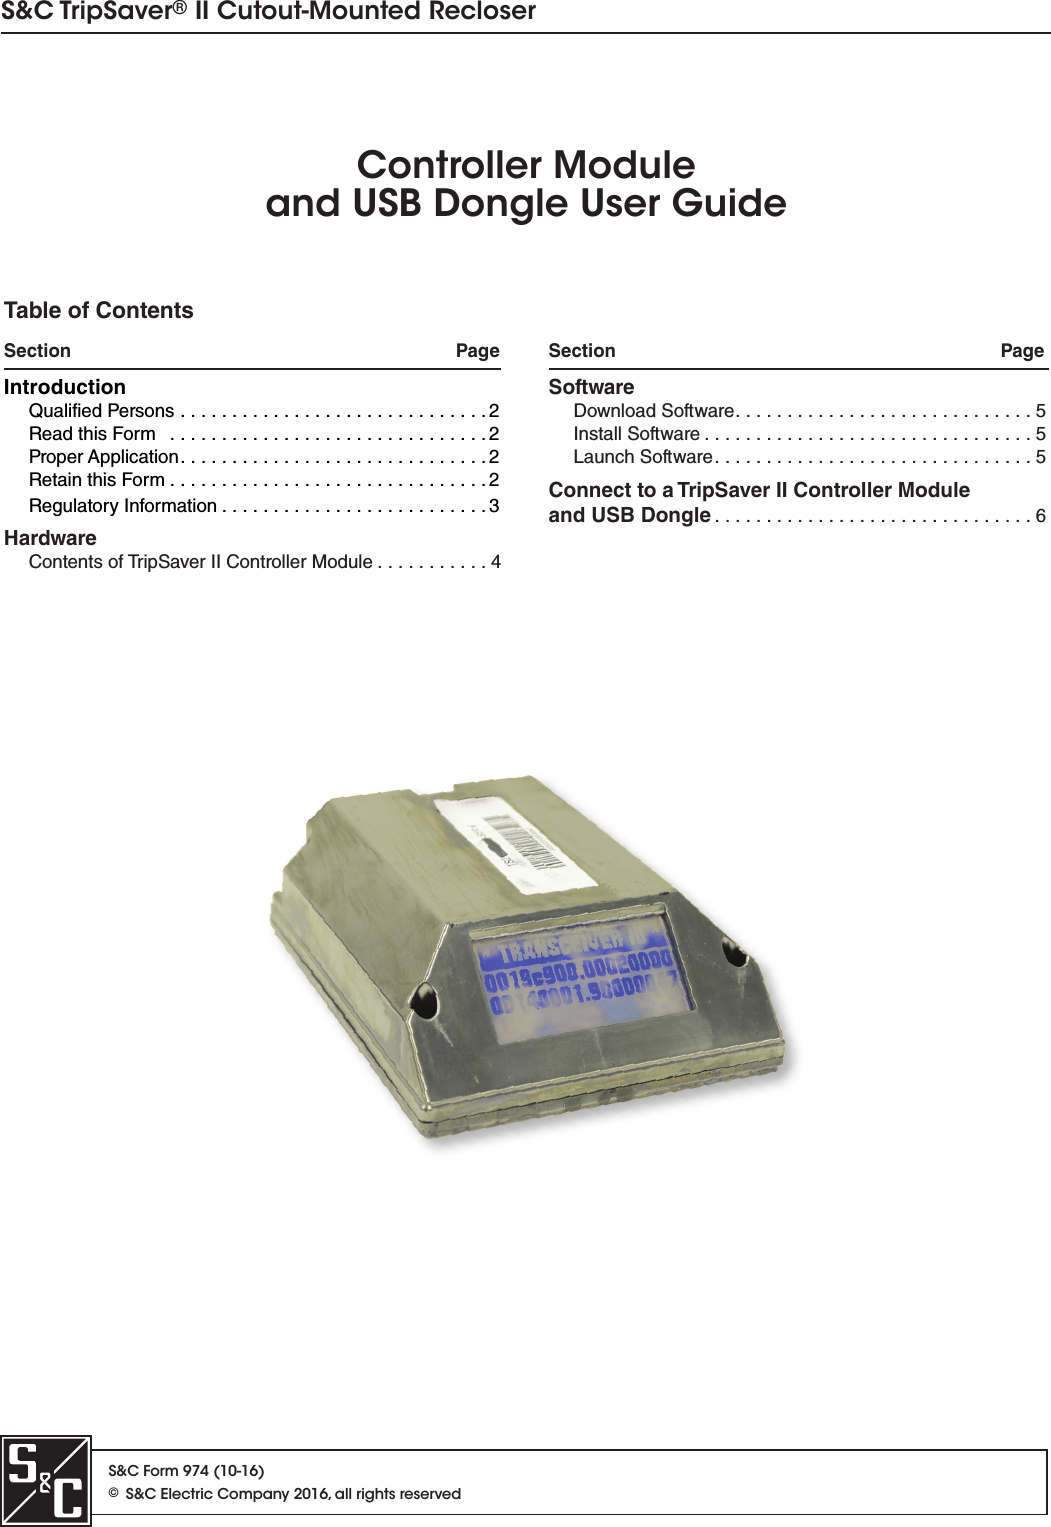 S&amp;C Form 974 (10-16)©S&amp;C Electric Company 2016, all rights reservedS&amp;C TripSaver® II Cutout-Mounted RecloserController Moduleand USB Dongle User GuideTable of ContentsSection   Page Section   PageIntroductionQualified Persons  . . . . . . . . . . . . . . . . . . . . . . . . . . . . . . 2Read this Form   . . . . . . . . . . . . . . . . . . . . . . . . . . . . . . . 2Proper Application . . . . . . . . . . . . . . . . . . . . . . . . . . . . . . 2 Retain this Form . . . . . . . . . . . . . . . . . . . . . . . . . . . . . . . 2Regulatory Information . . . . . . . . . . . . . . . . . . . . . . . . . . 3HardwareContents of TripSaver II Controller Module . . . . . . . . . . . 4SoftwareDownload Software . . . . . . . . . . . . . . . . . . . . . . . . . . . . . 5Install Software . . . . . . . . . . . . . . . . . . . . . . . . . . . . . . . . 5Launch Software . . . . . . . . . . . . . . . . . . . . . . . . . . . . . . . 5Connect to a TripSaver II Controller Moduleand USB Dongle . . . . . . . . . . . . . . . . . . . . . . . . . . . . . . . 6